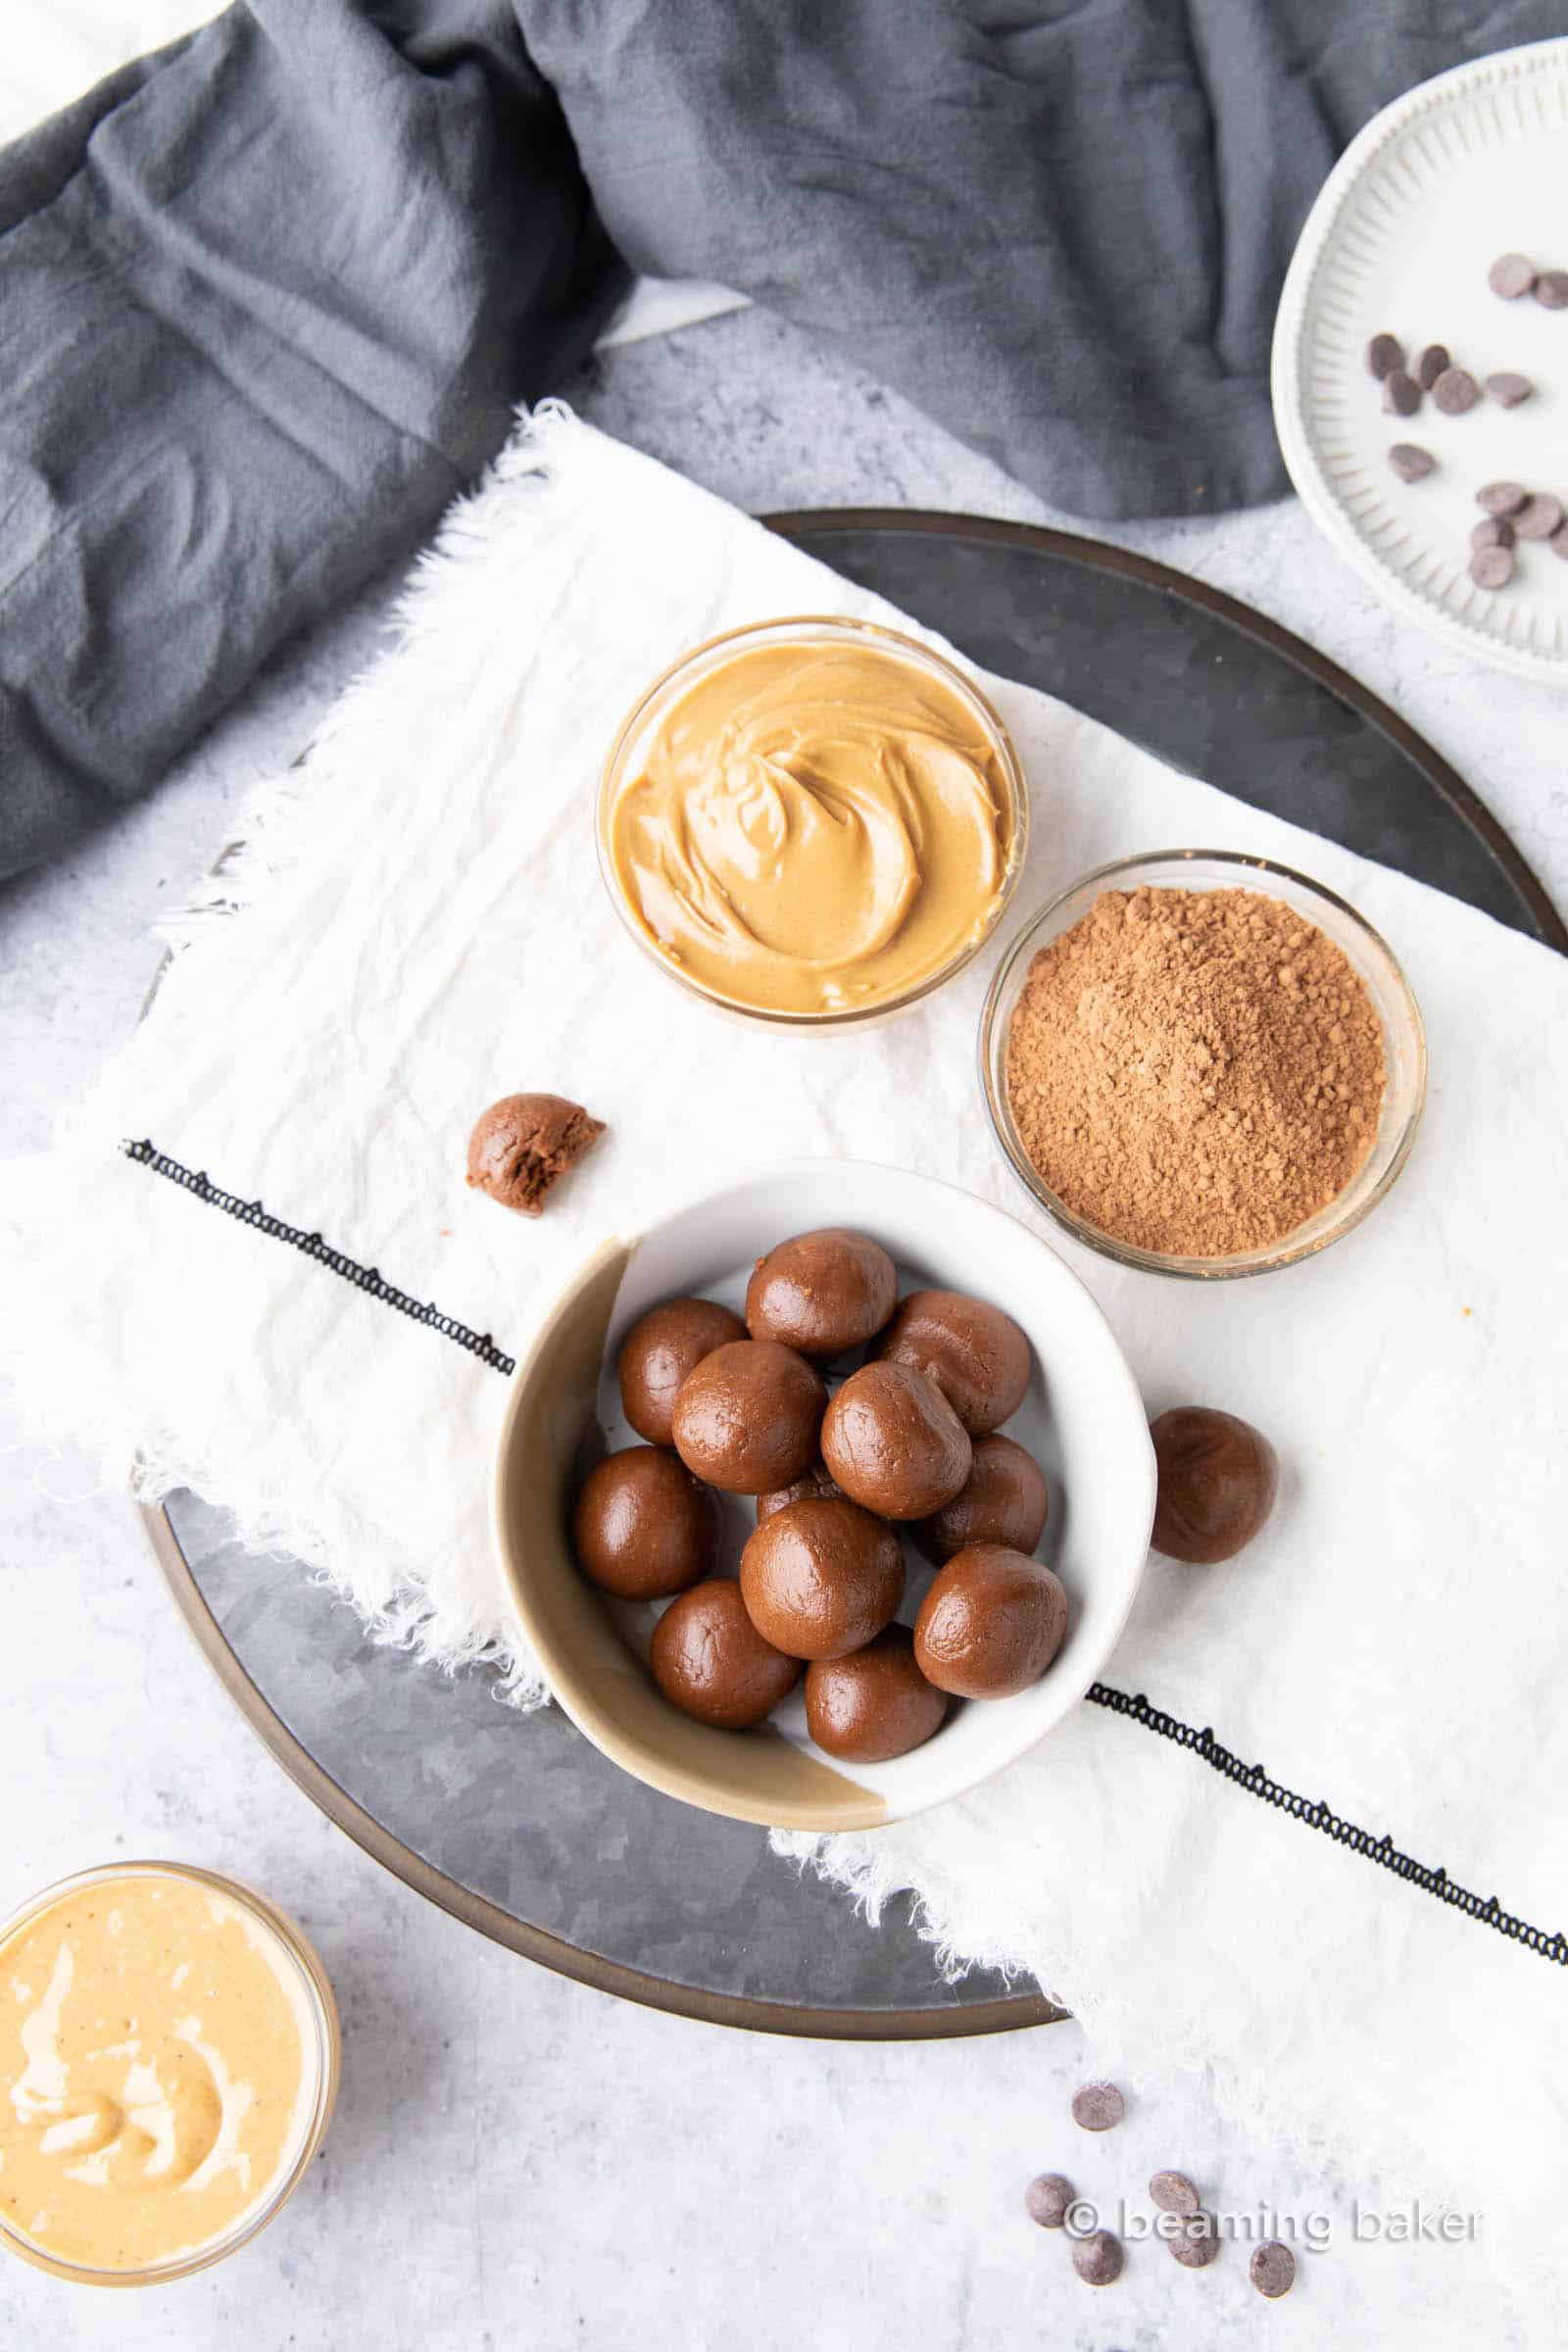 Keto Balls: just 4 ingredients for delicious chocolate keto peanut butter balls. Easy to make, ready in minutes and no bake! #Keto #PeanutButter #KetoBalls #NoBake | Recipe at BeamingBaker.com